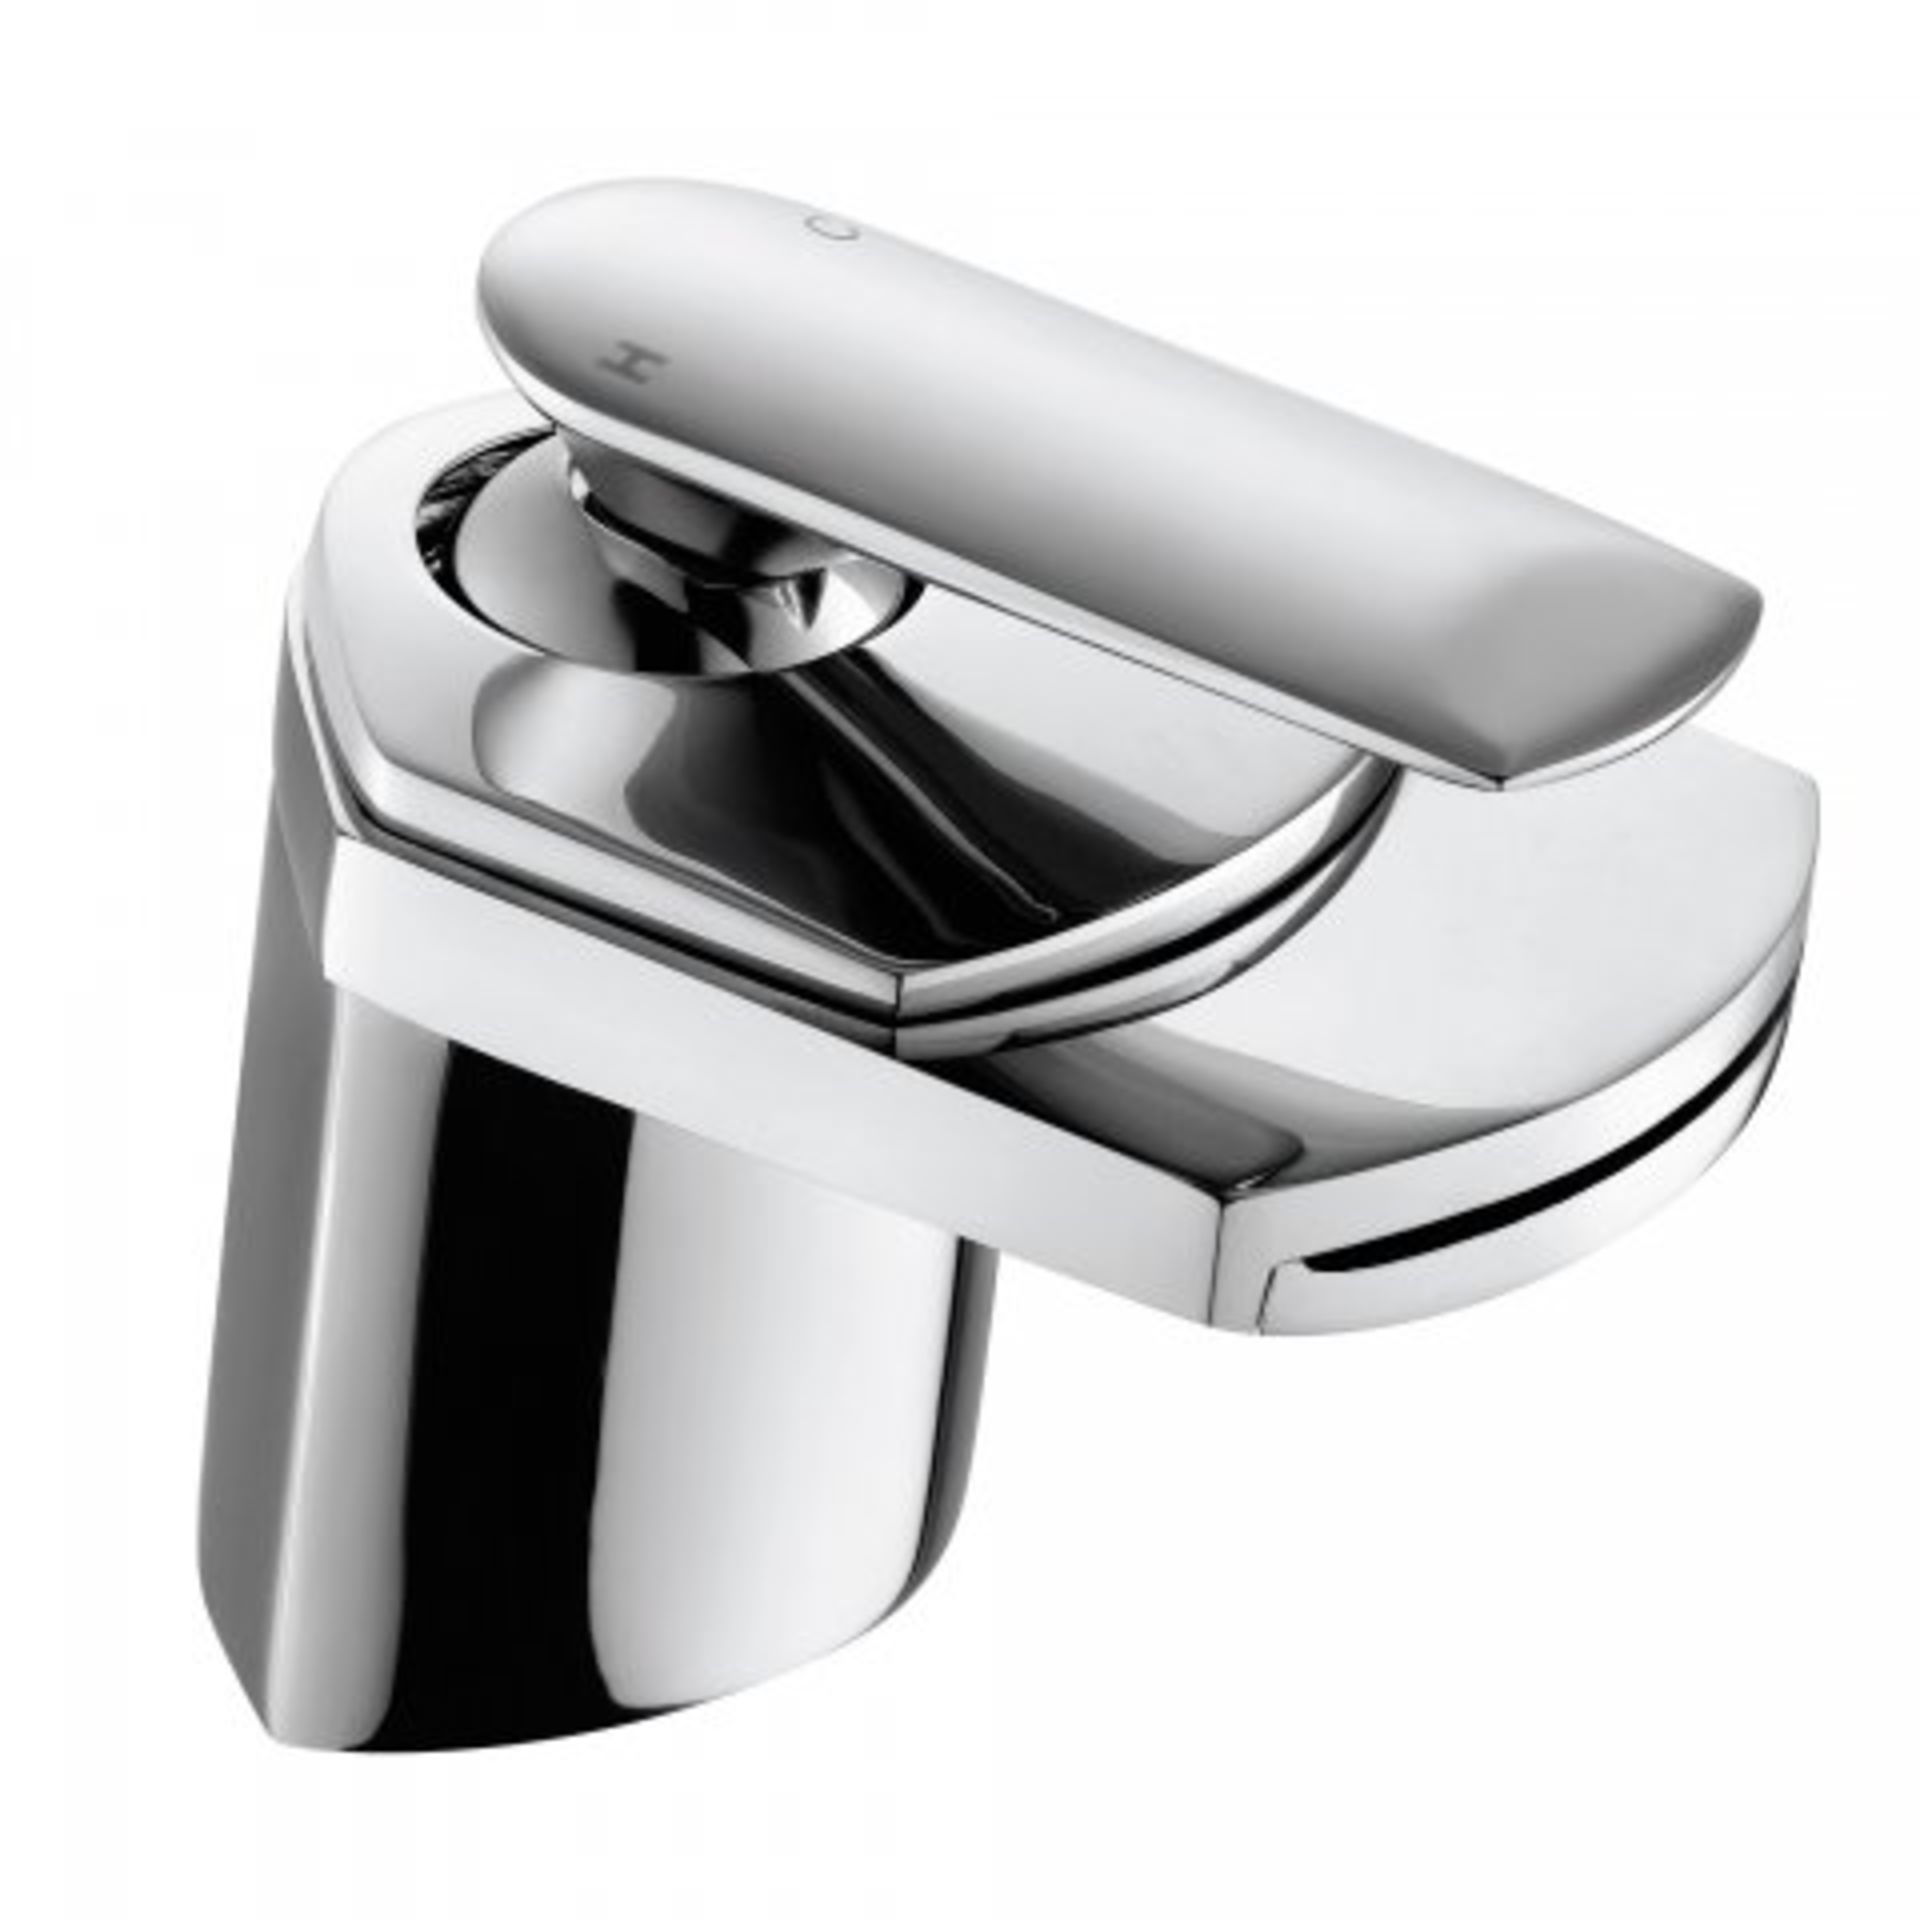 (I99) Oshi Waterfall Basin Mixer Tap Assured Performance Maintenance free technology is incorporated - Image 5 of 5